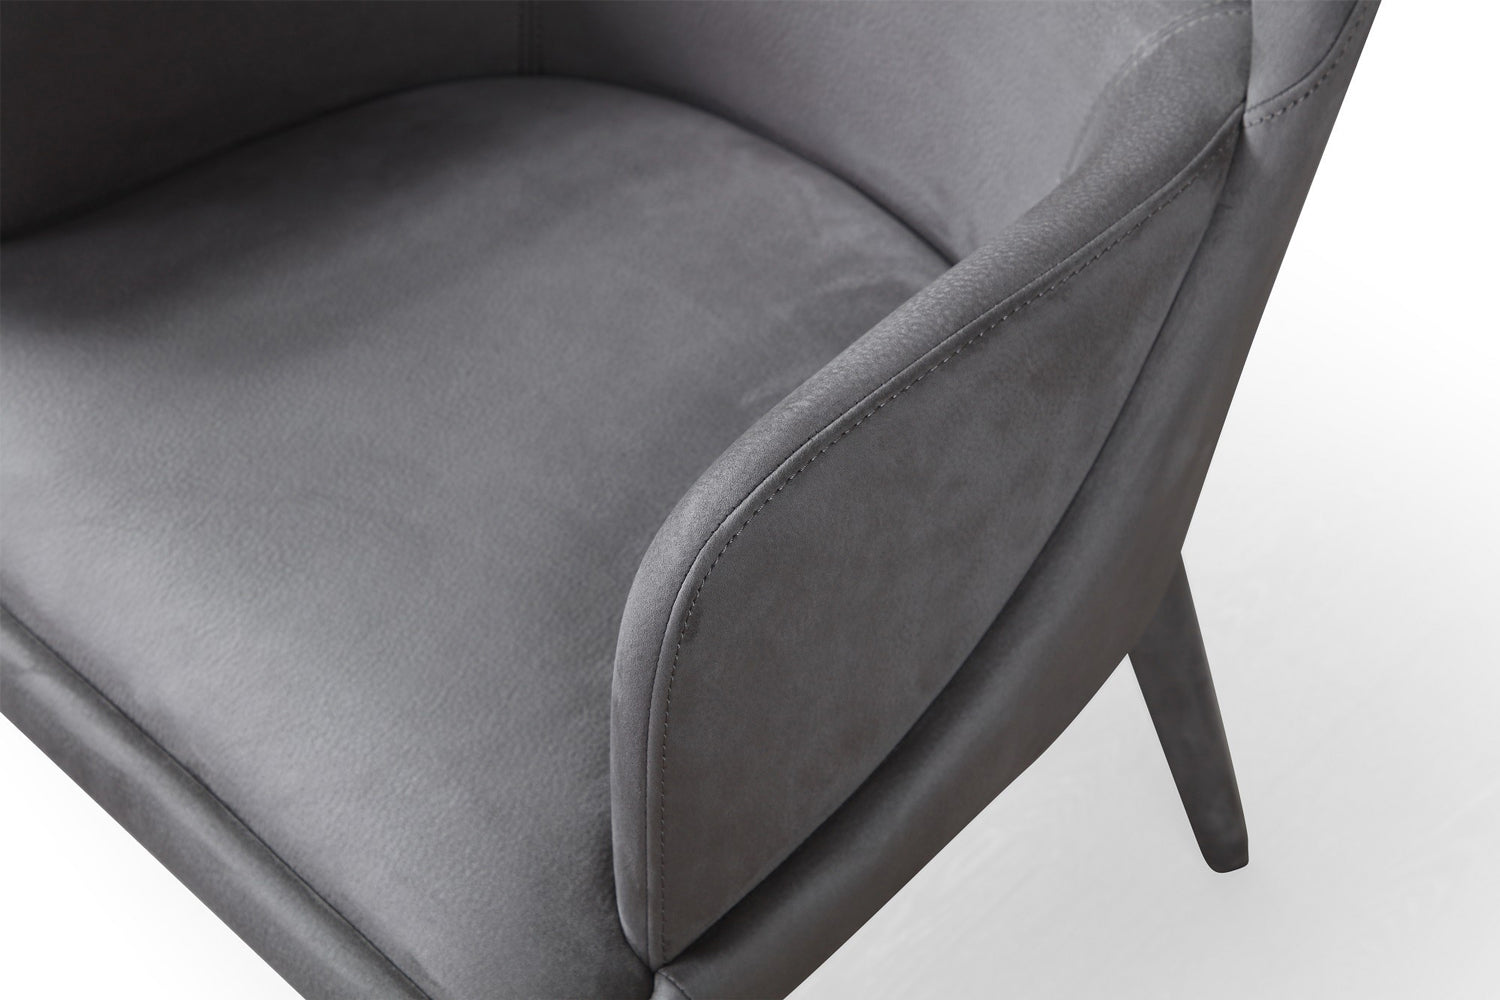 Baxter Leather Arm Chair in Grey | J&M Furniture